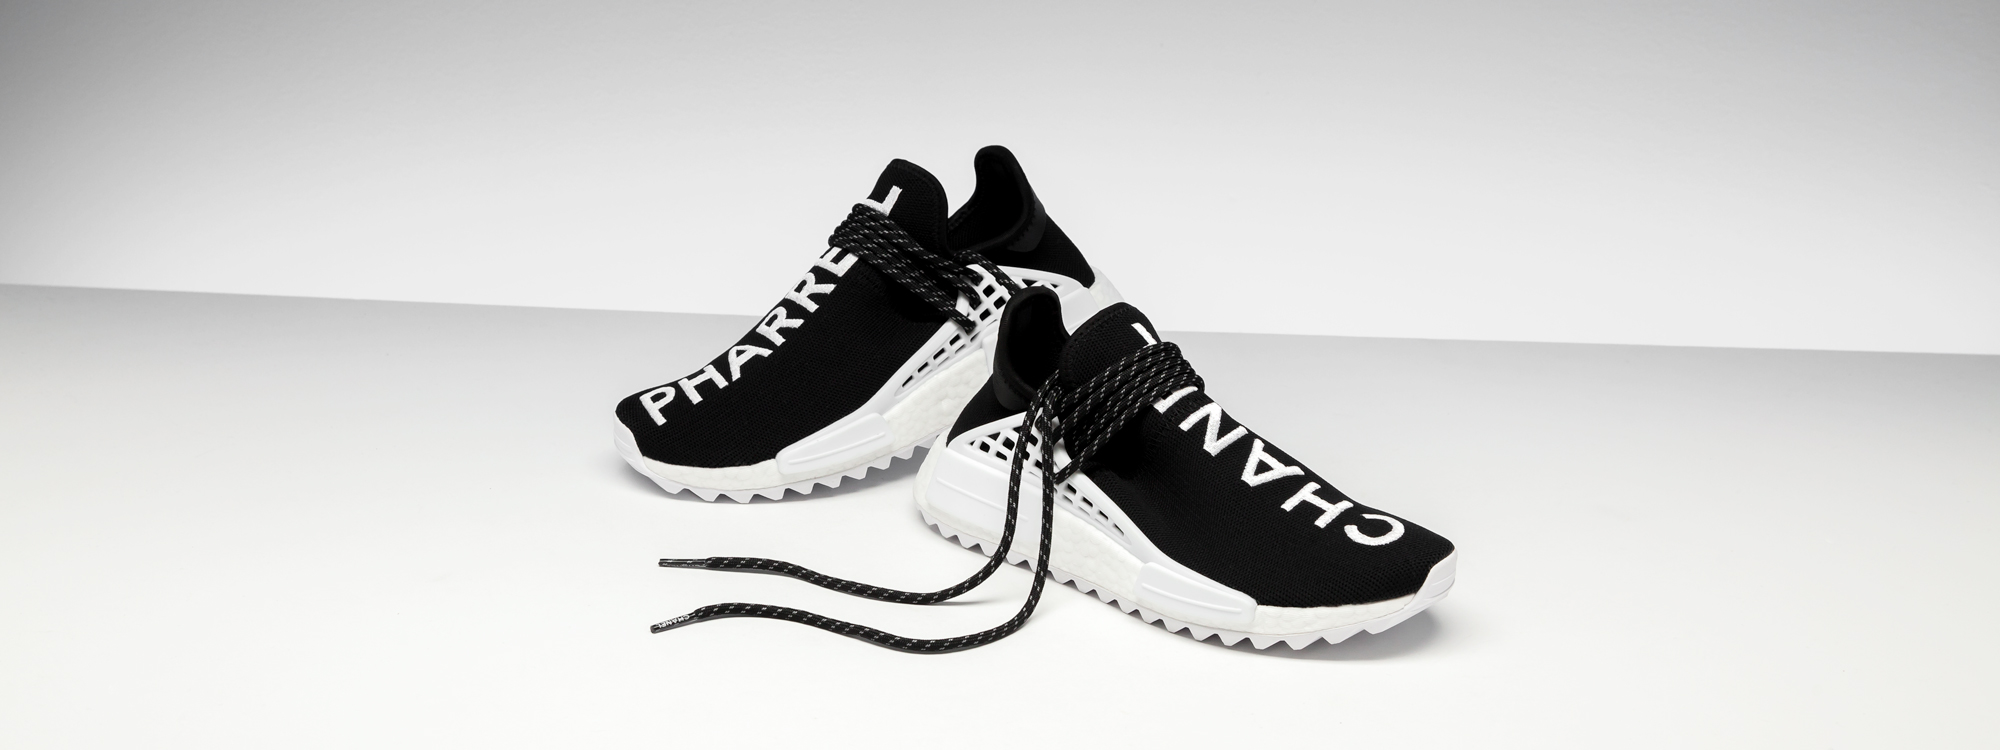 Human Race    Chanel shoes price